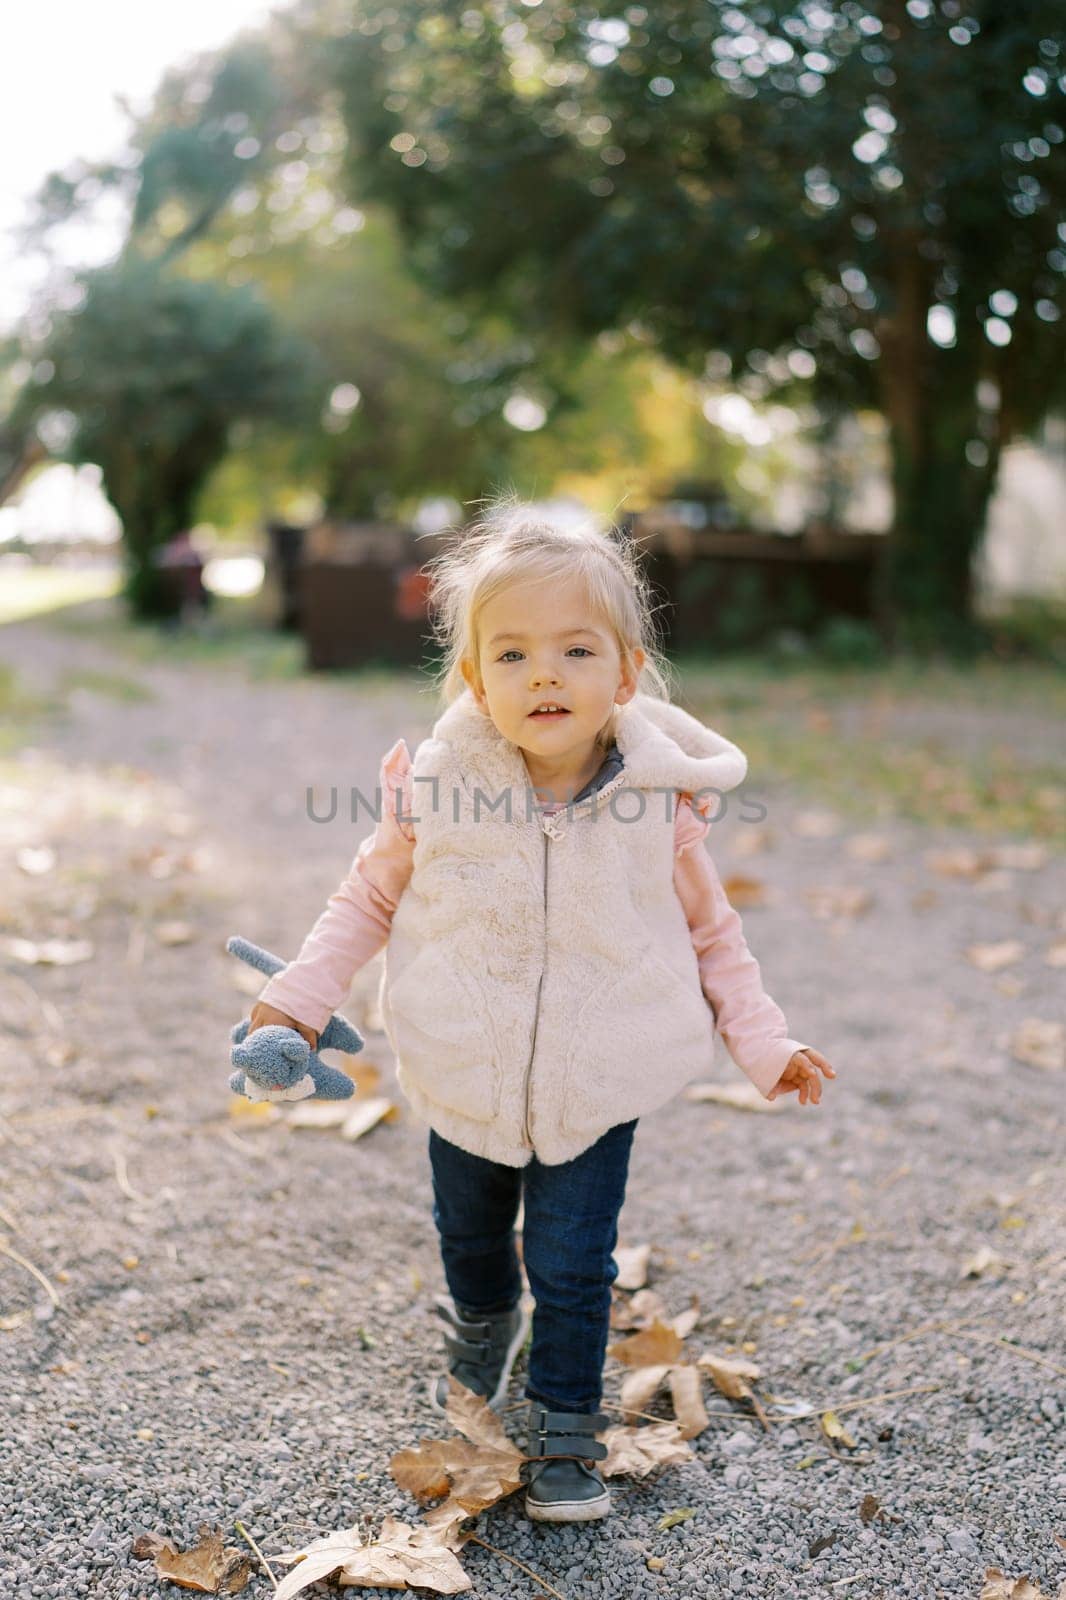 Little girl with a toy walks along a path among fallen leaves. High quality photo